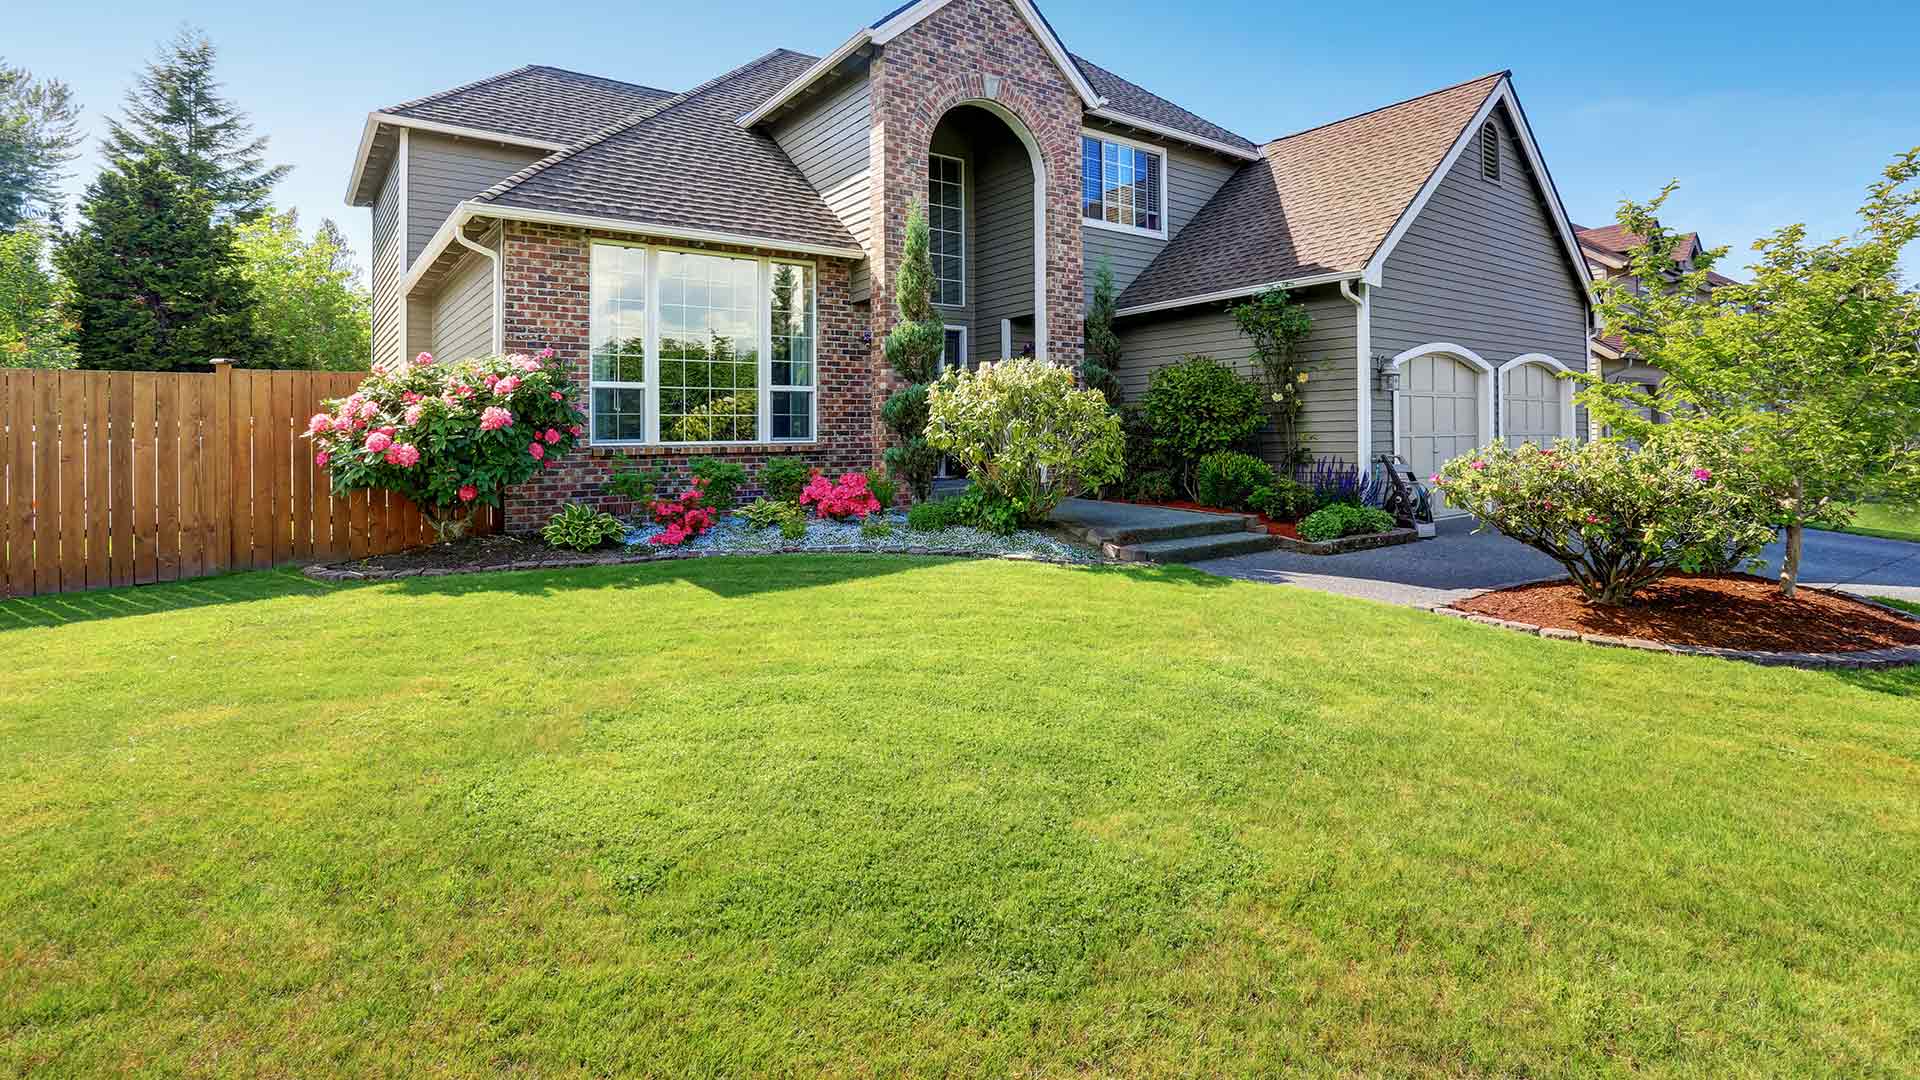 A home in Bethalto, IL with landscaping and lawn care service.